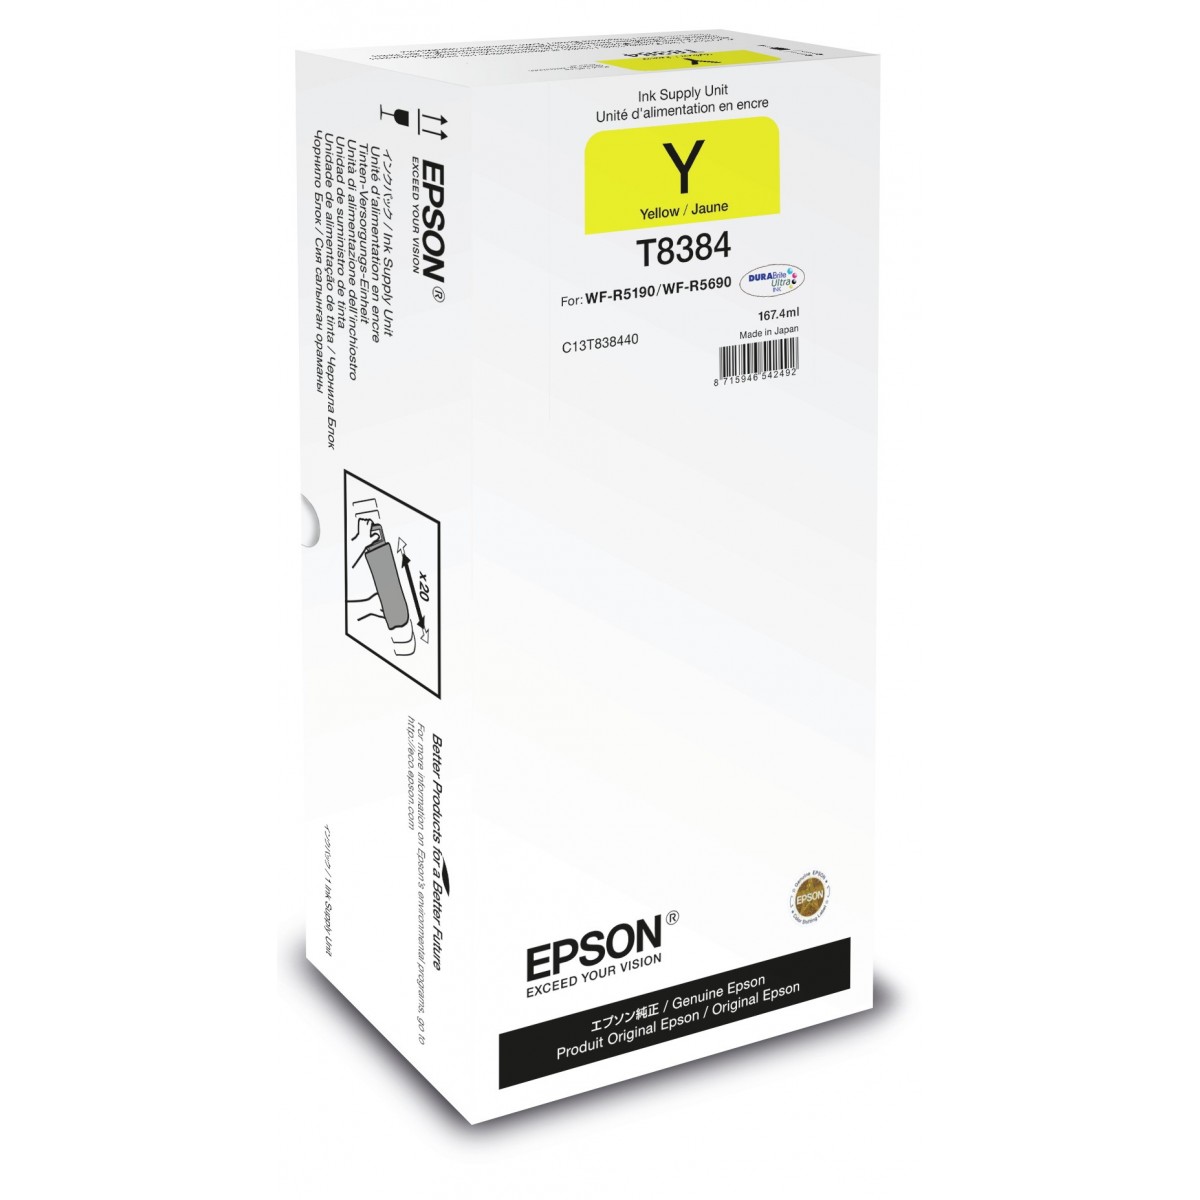 Epson Yellow XL Ink Supply Unit - Pigment-based ink - 1 pc(s)